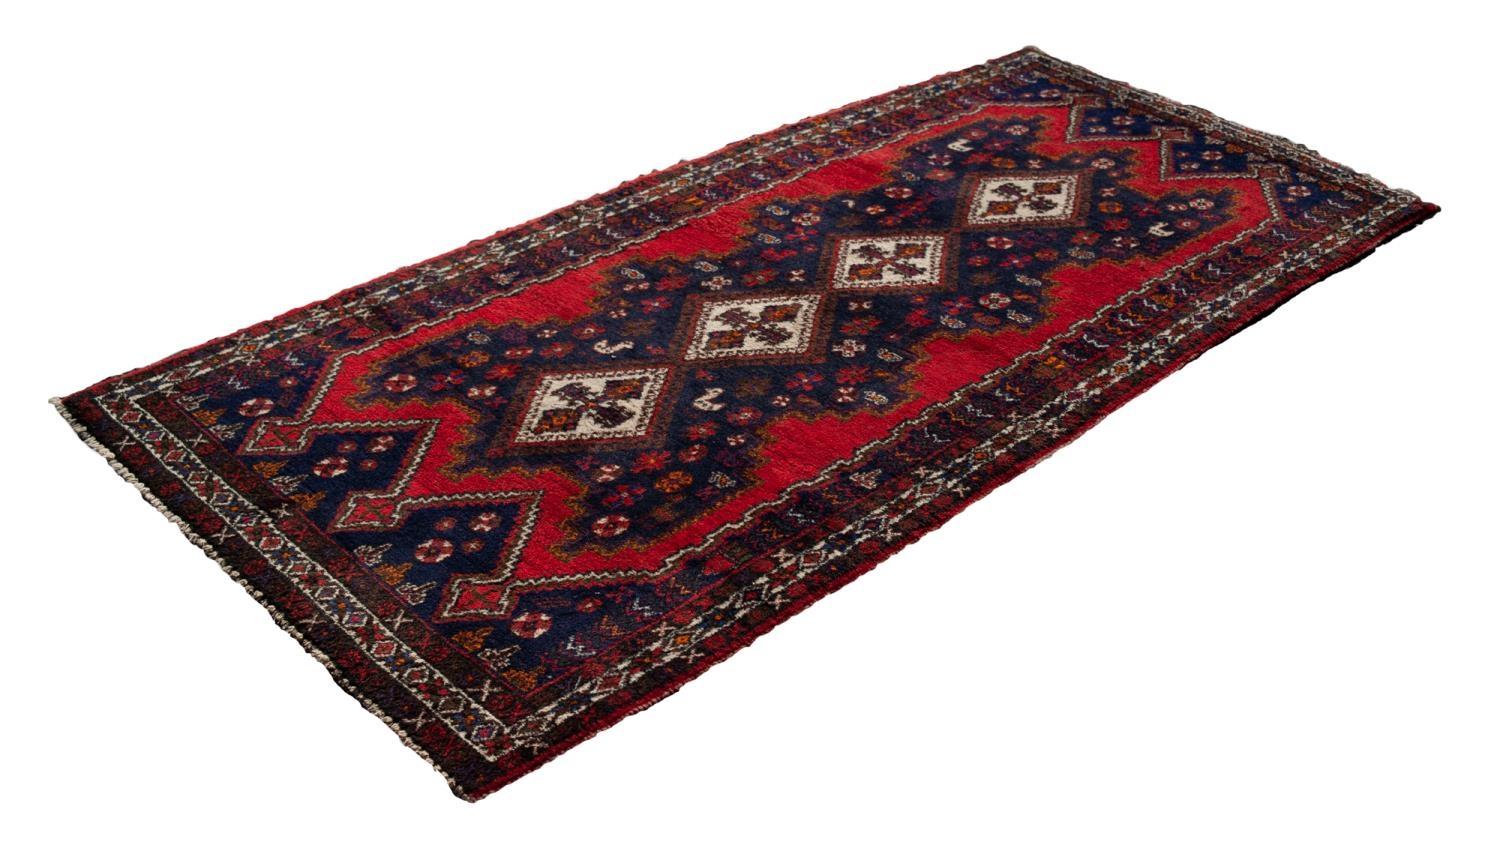 LARGE SHIRAZ RUG WITH A CHAIN OF FOUR WHITE GROUND DIAMOND SHAPED CENTRE MEDALLIONS, on a black